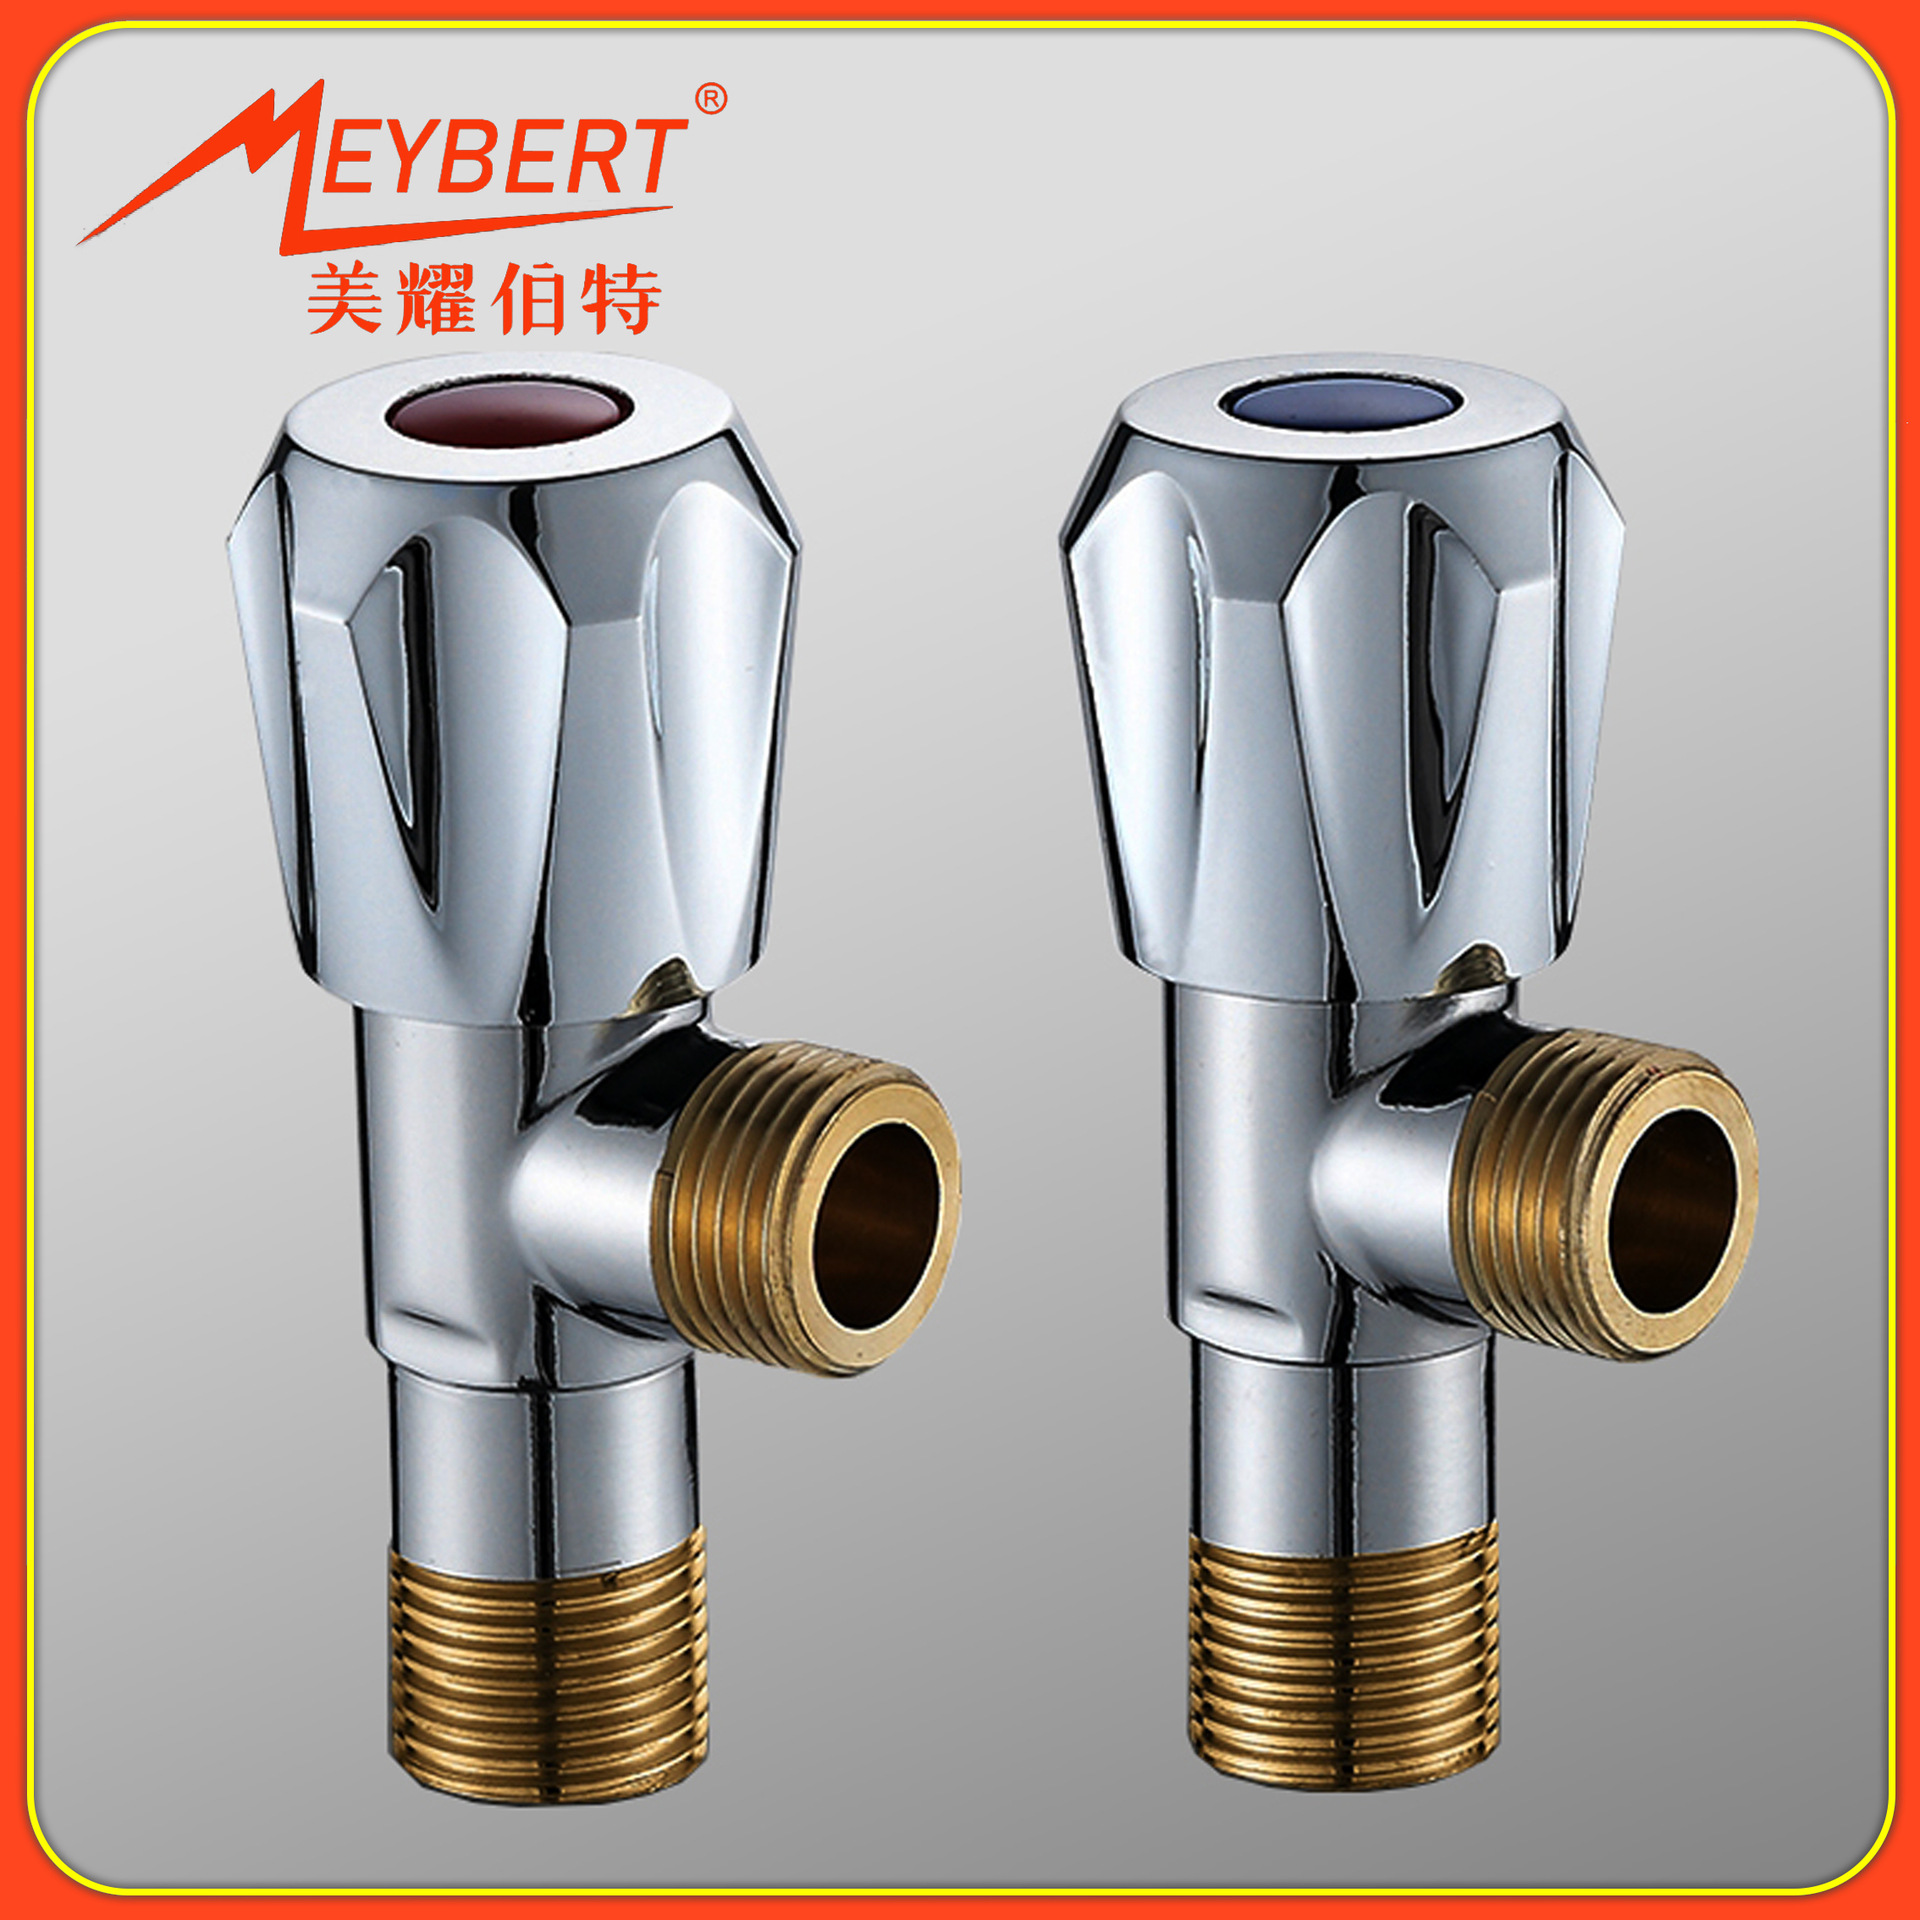  triangle valve all copper hot and cold water DN15 water stop valve household water heater mixing valve switch quick-open copper angle valve